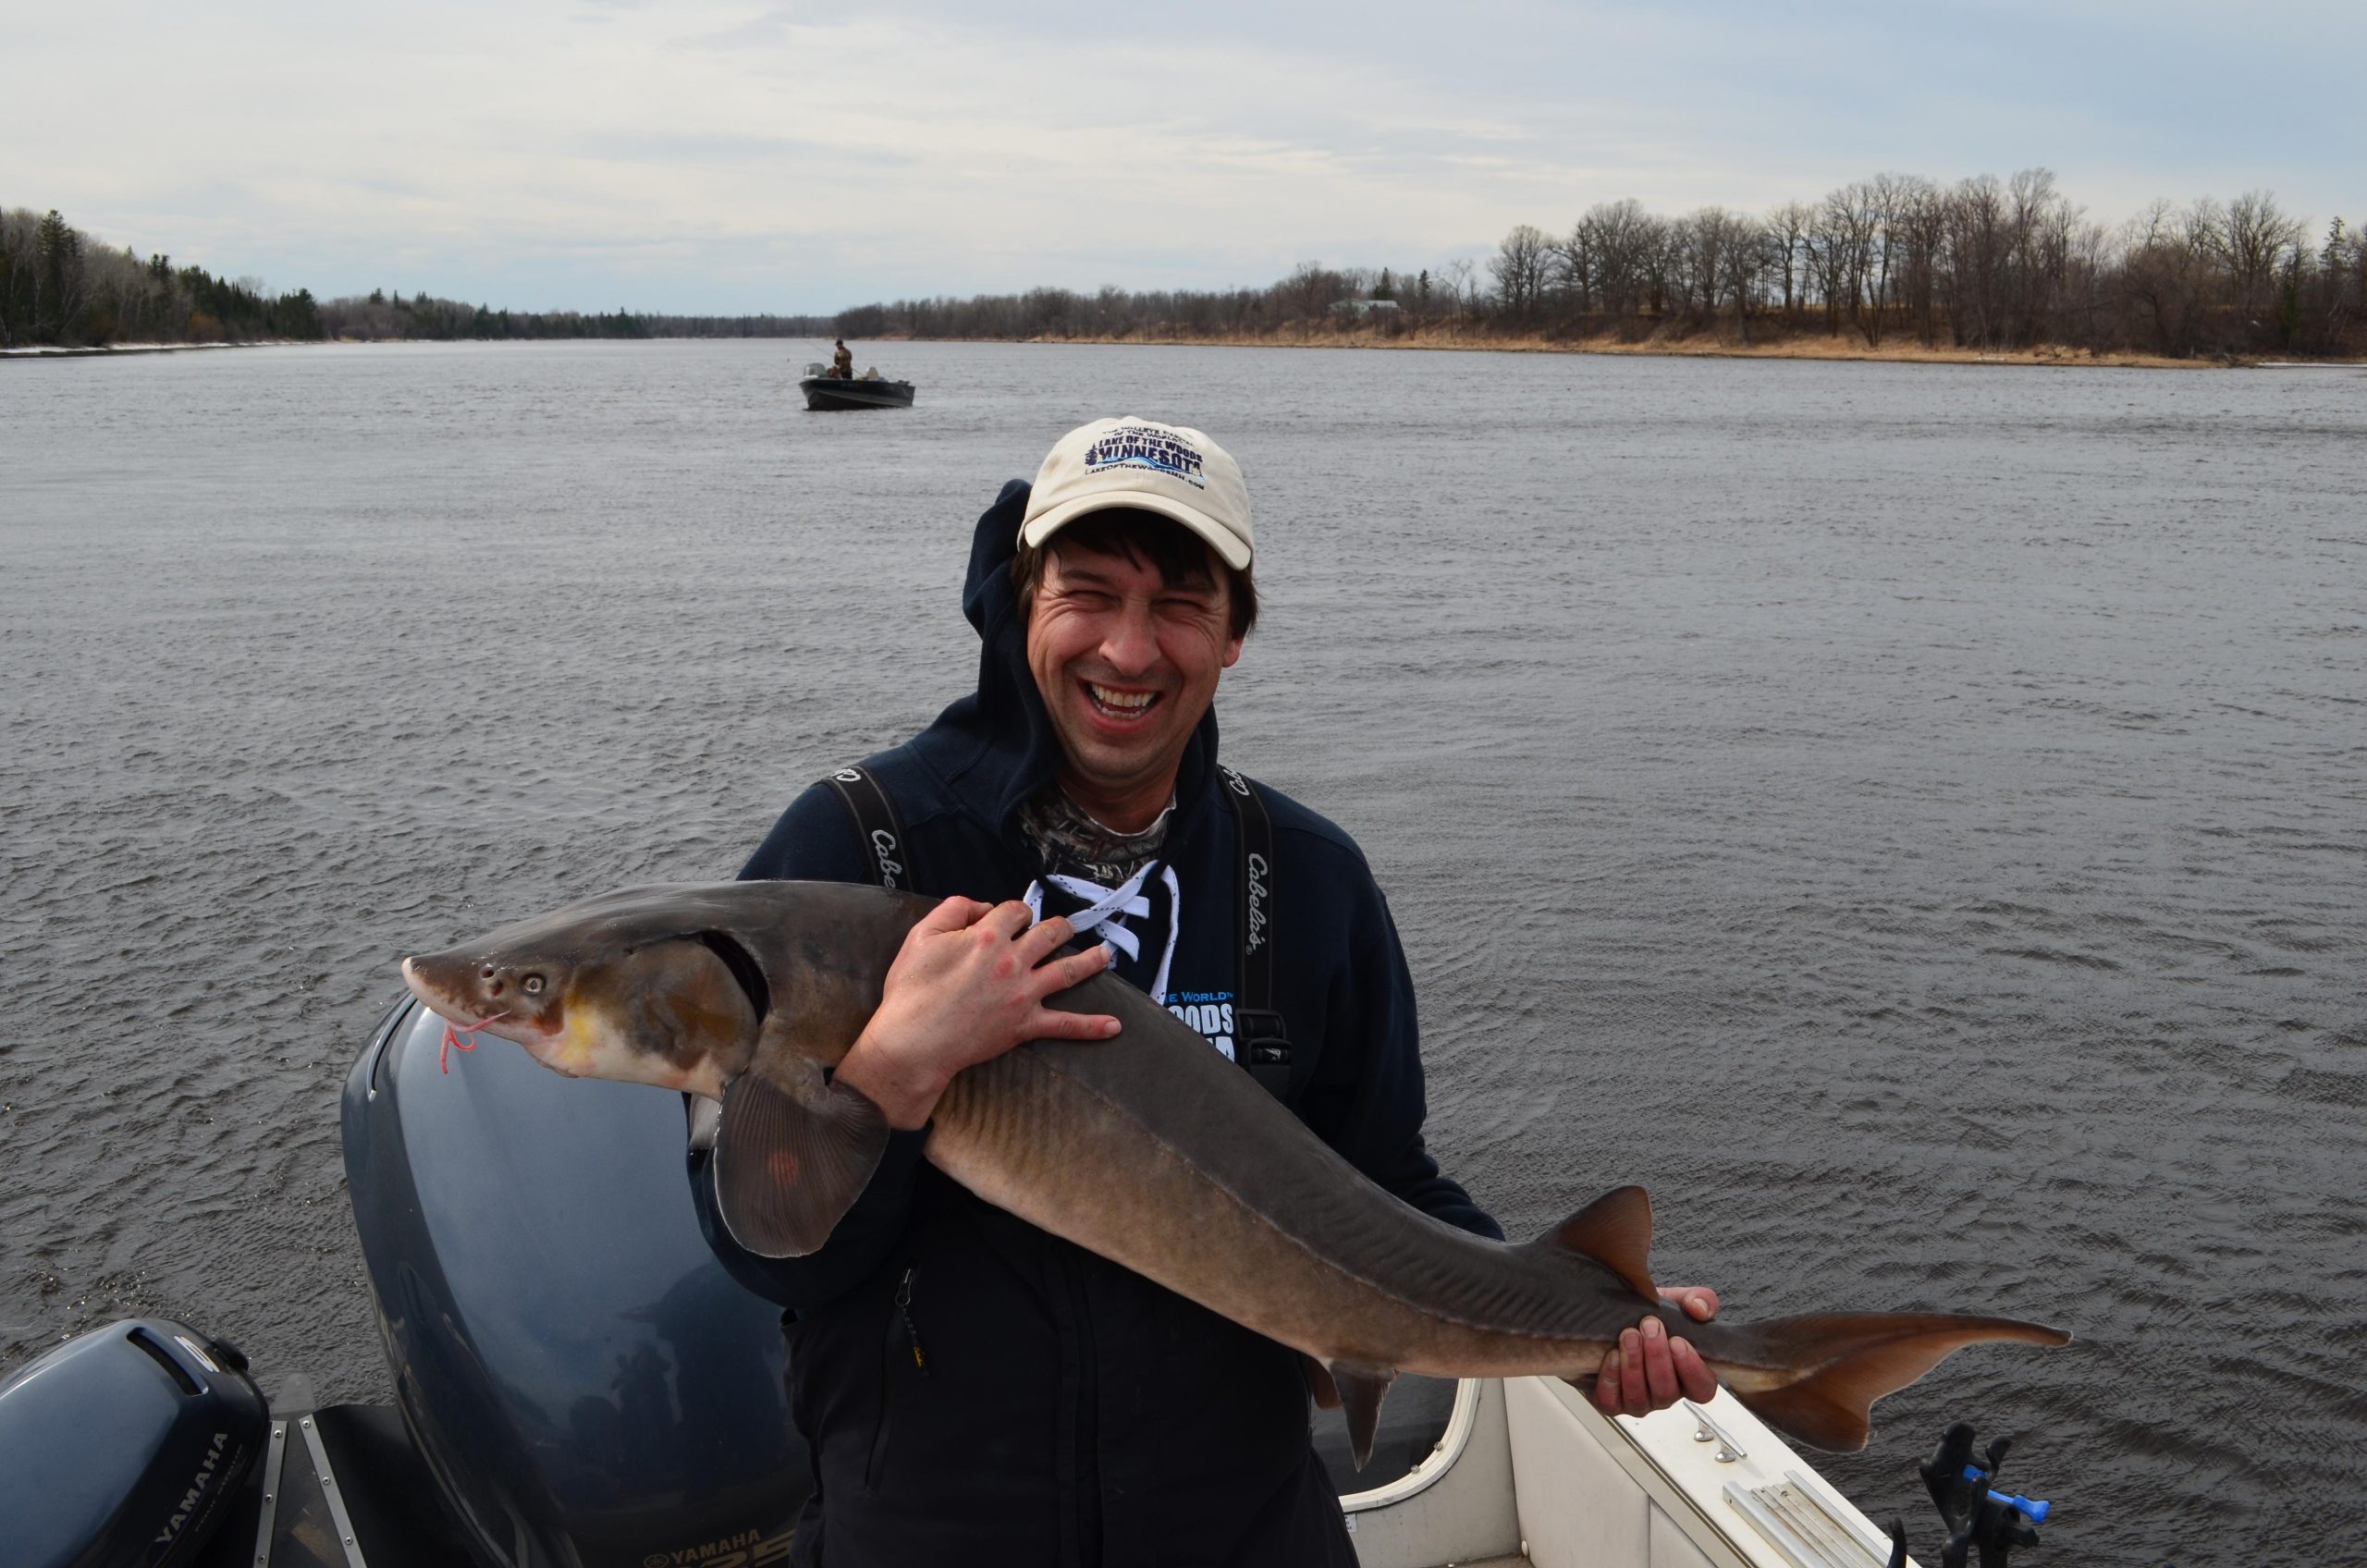 How To Use a Sturgeon Rig for Rainy River Sturgeon - Lake of the Woods